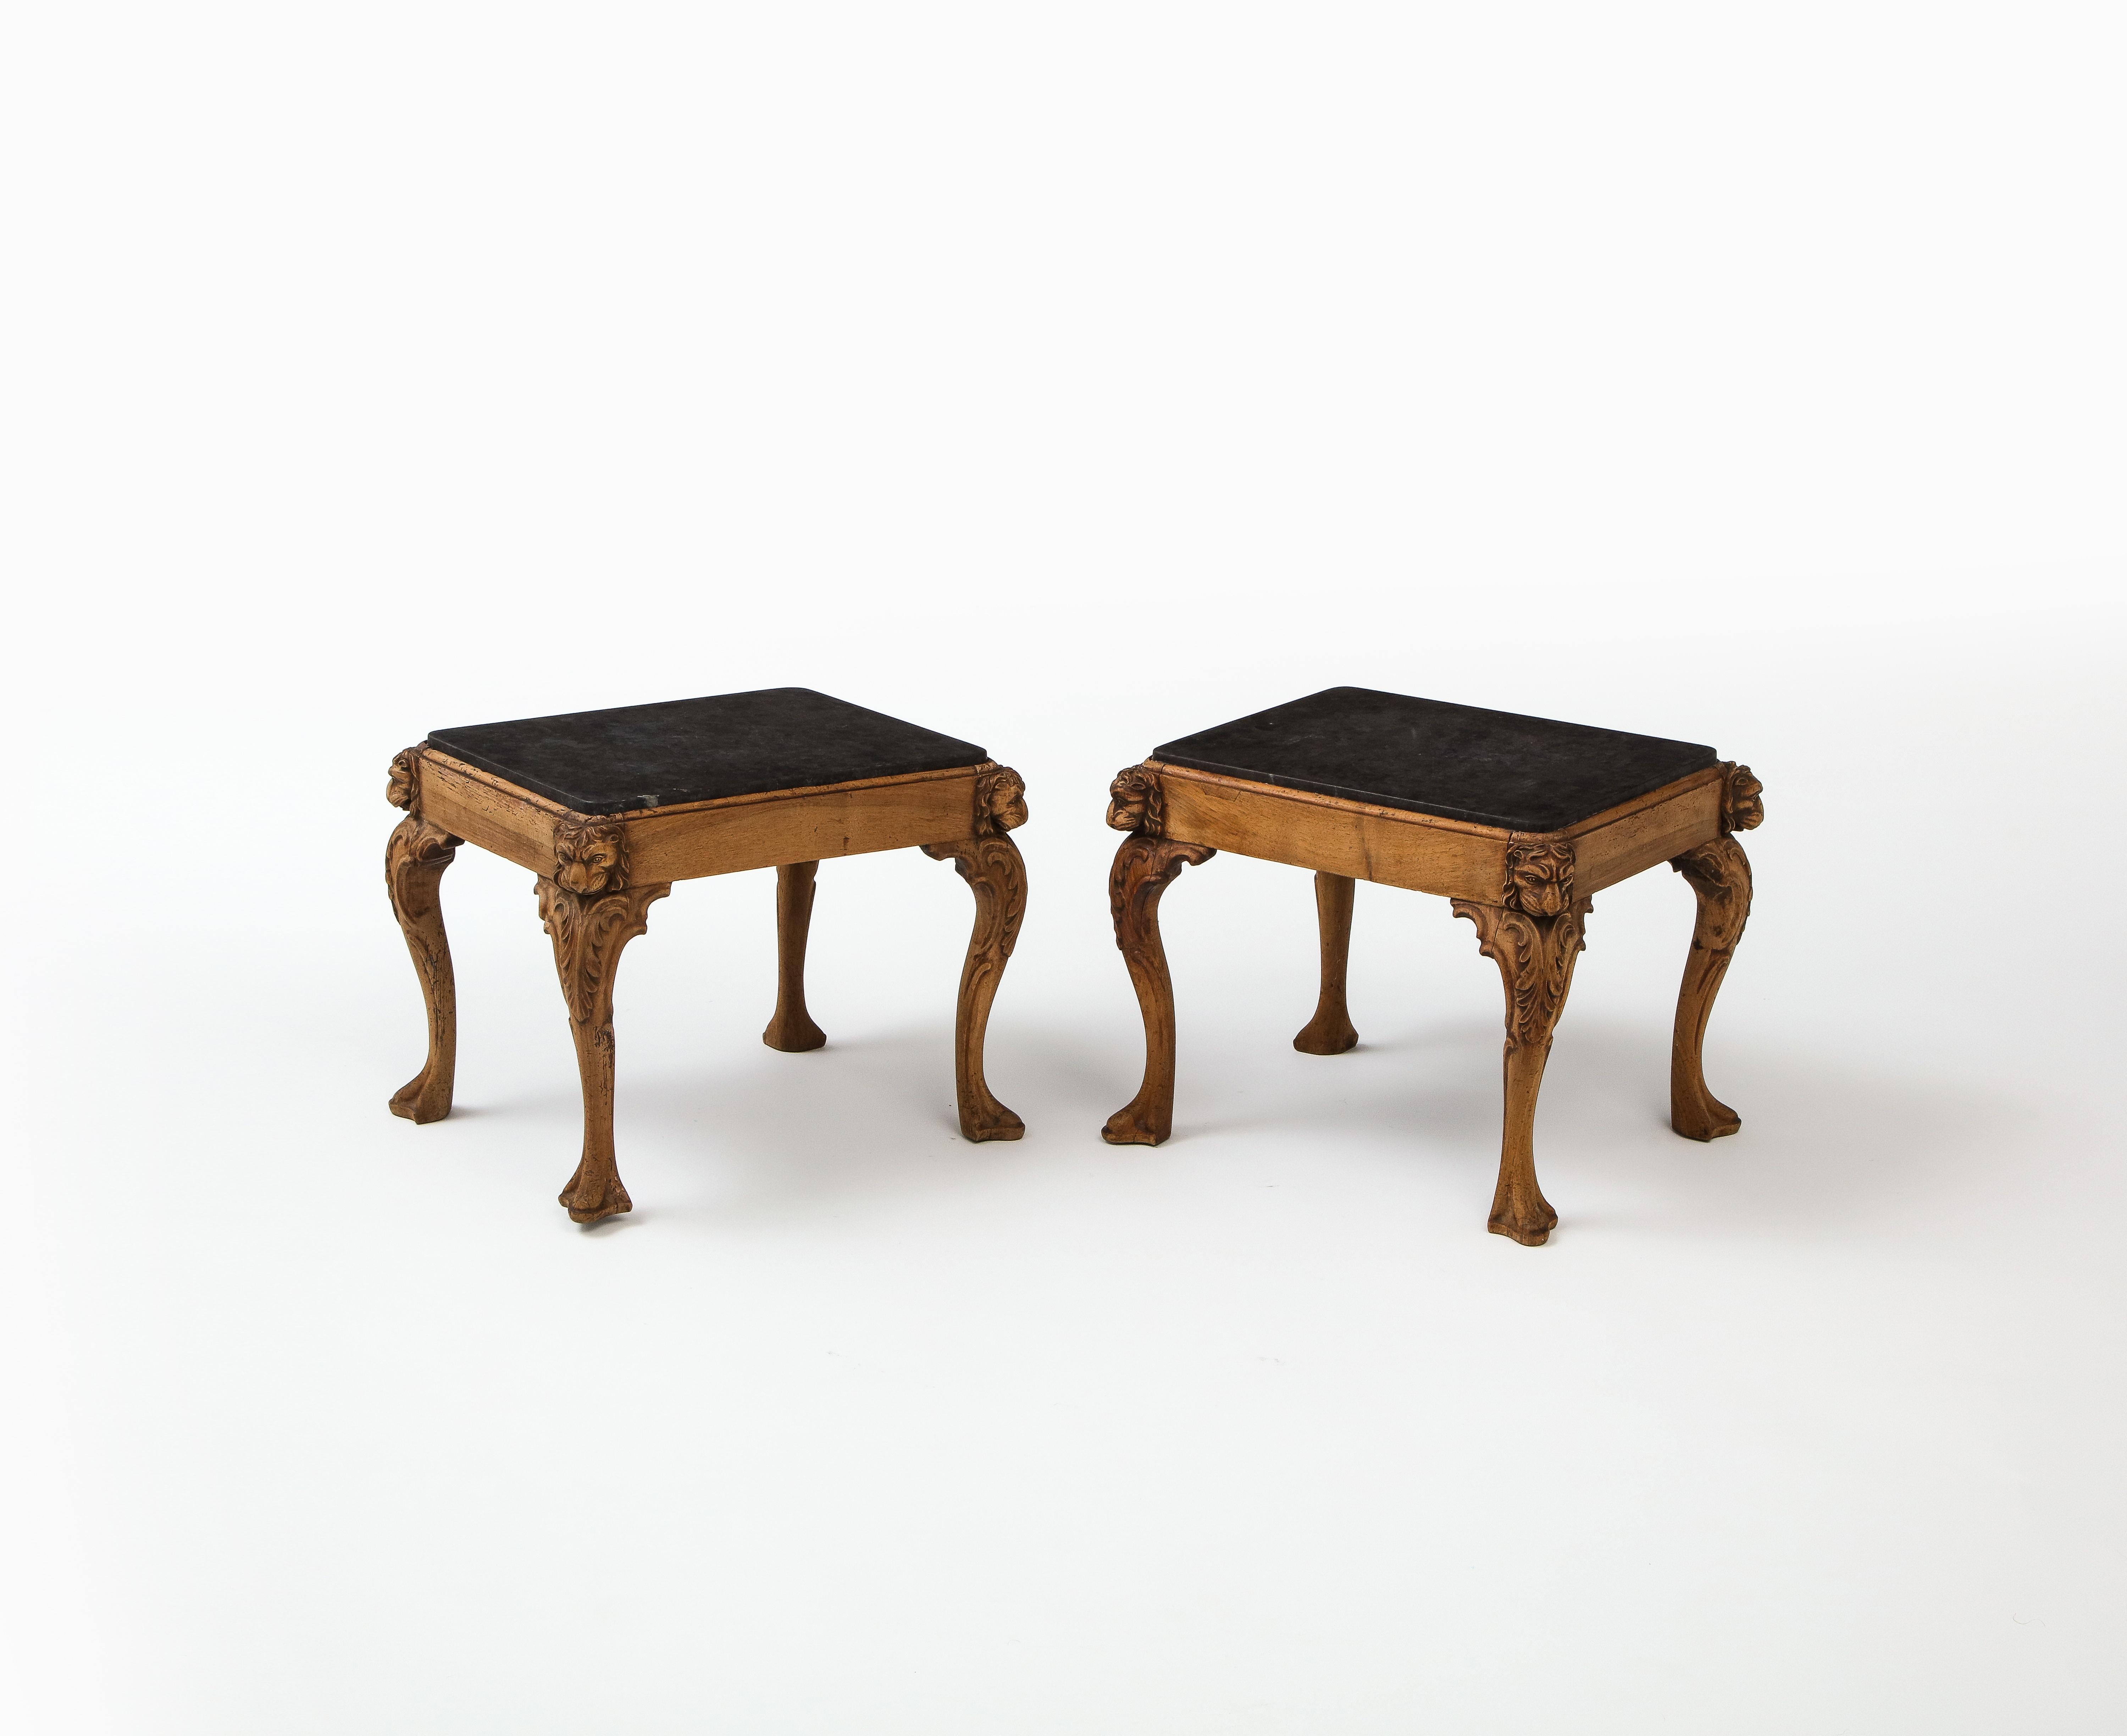 Pair of Queen Anne Style Cabriole Leg Coffee Tables, England, 19th Century For Sale 8